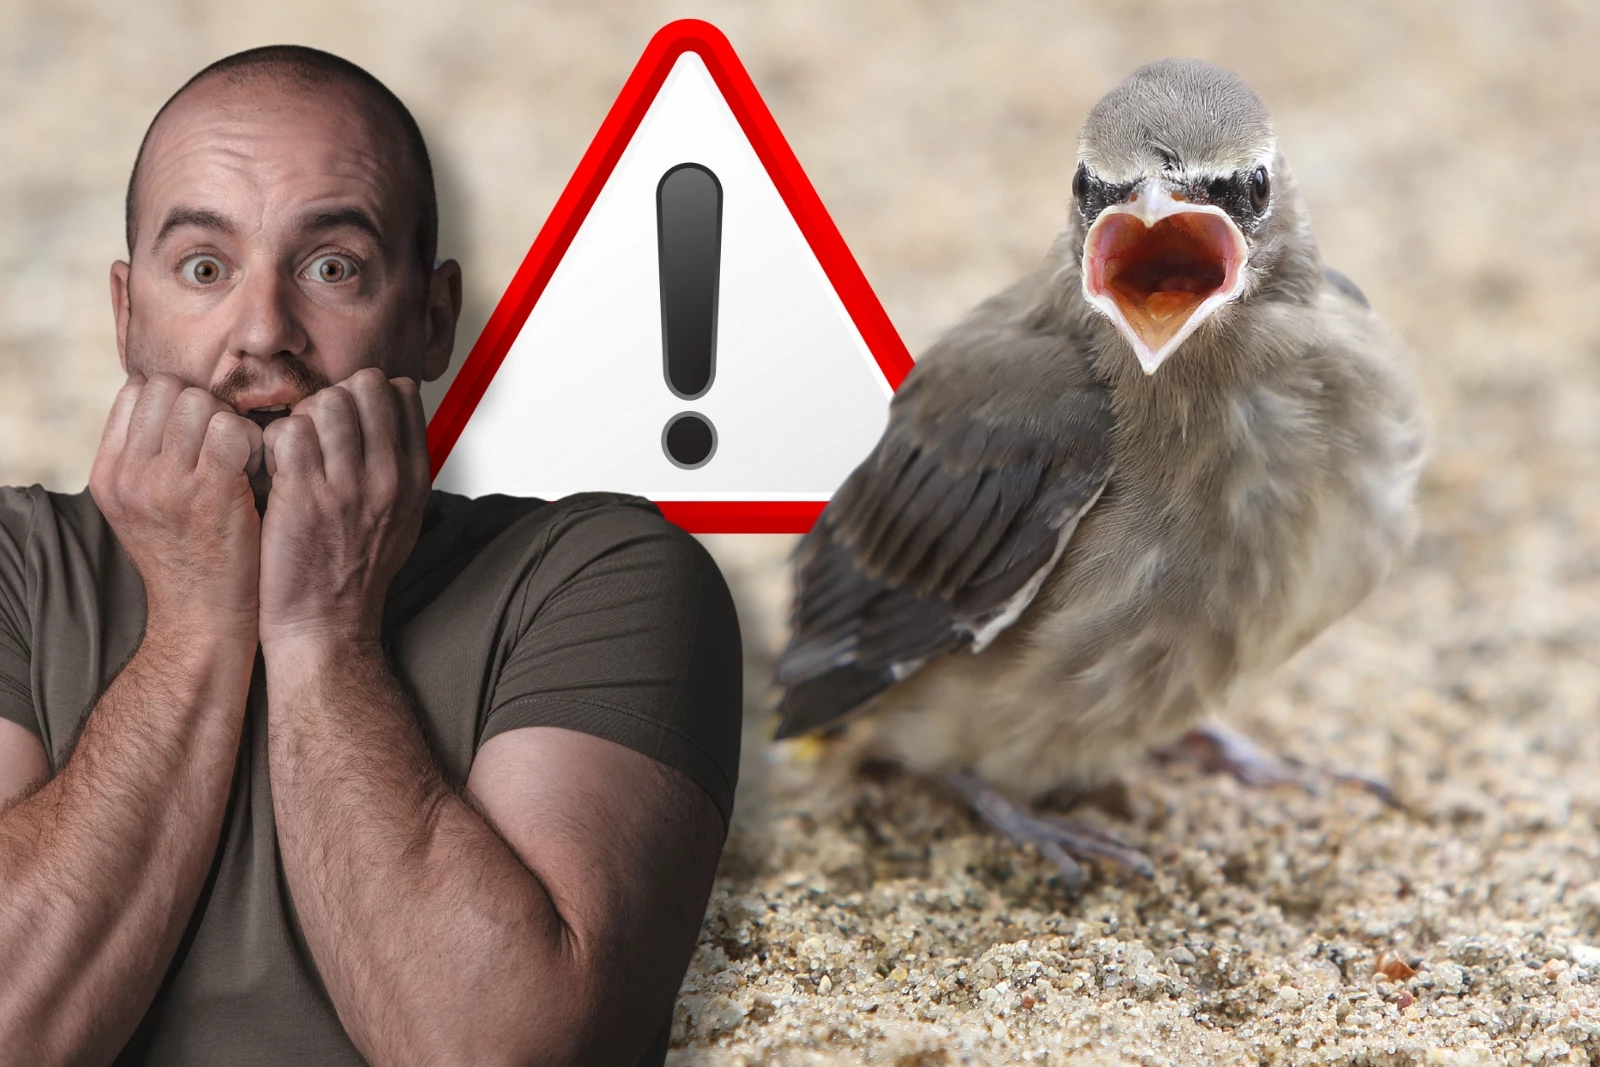 CAUTION: Think Twice Before Trying to Save That ‘Injured’ Baby Bird